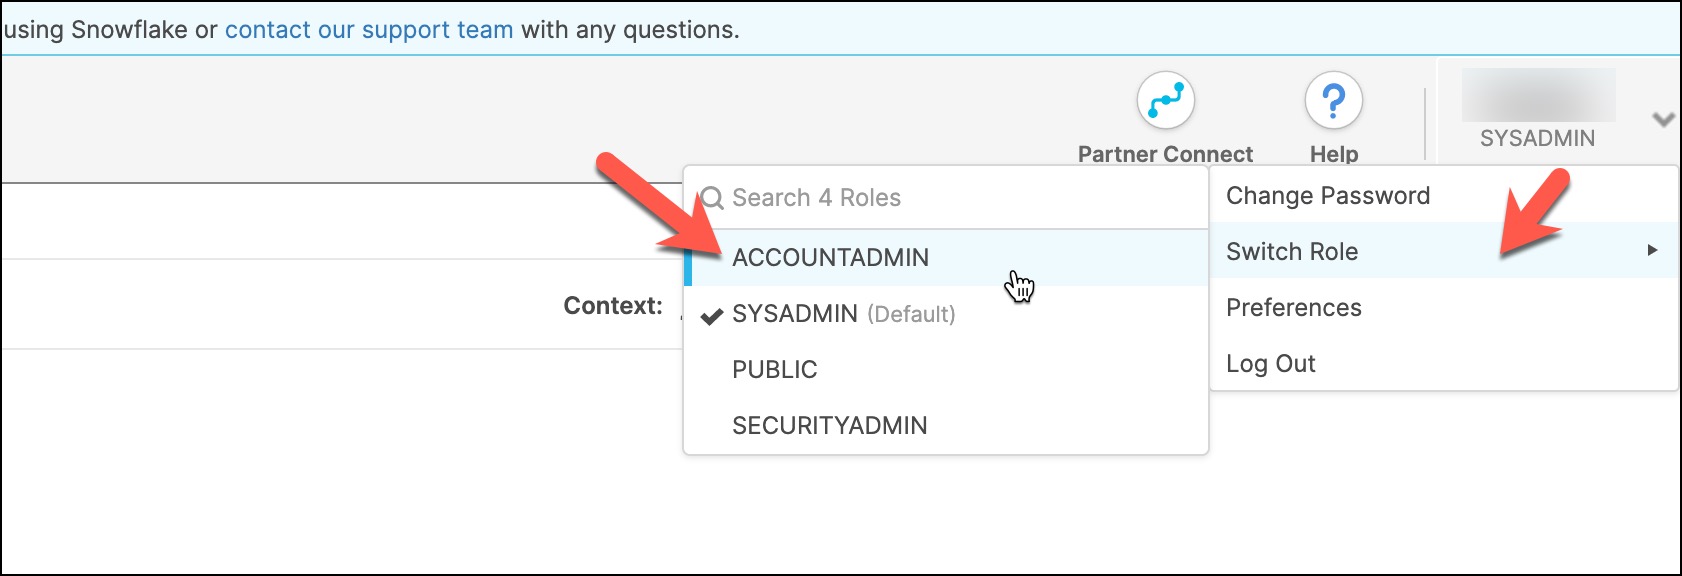 snowflake-login-to-console-and-switch-role-to-accoutadmin